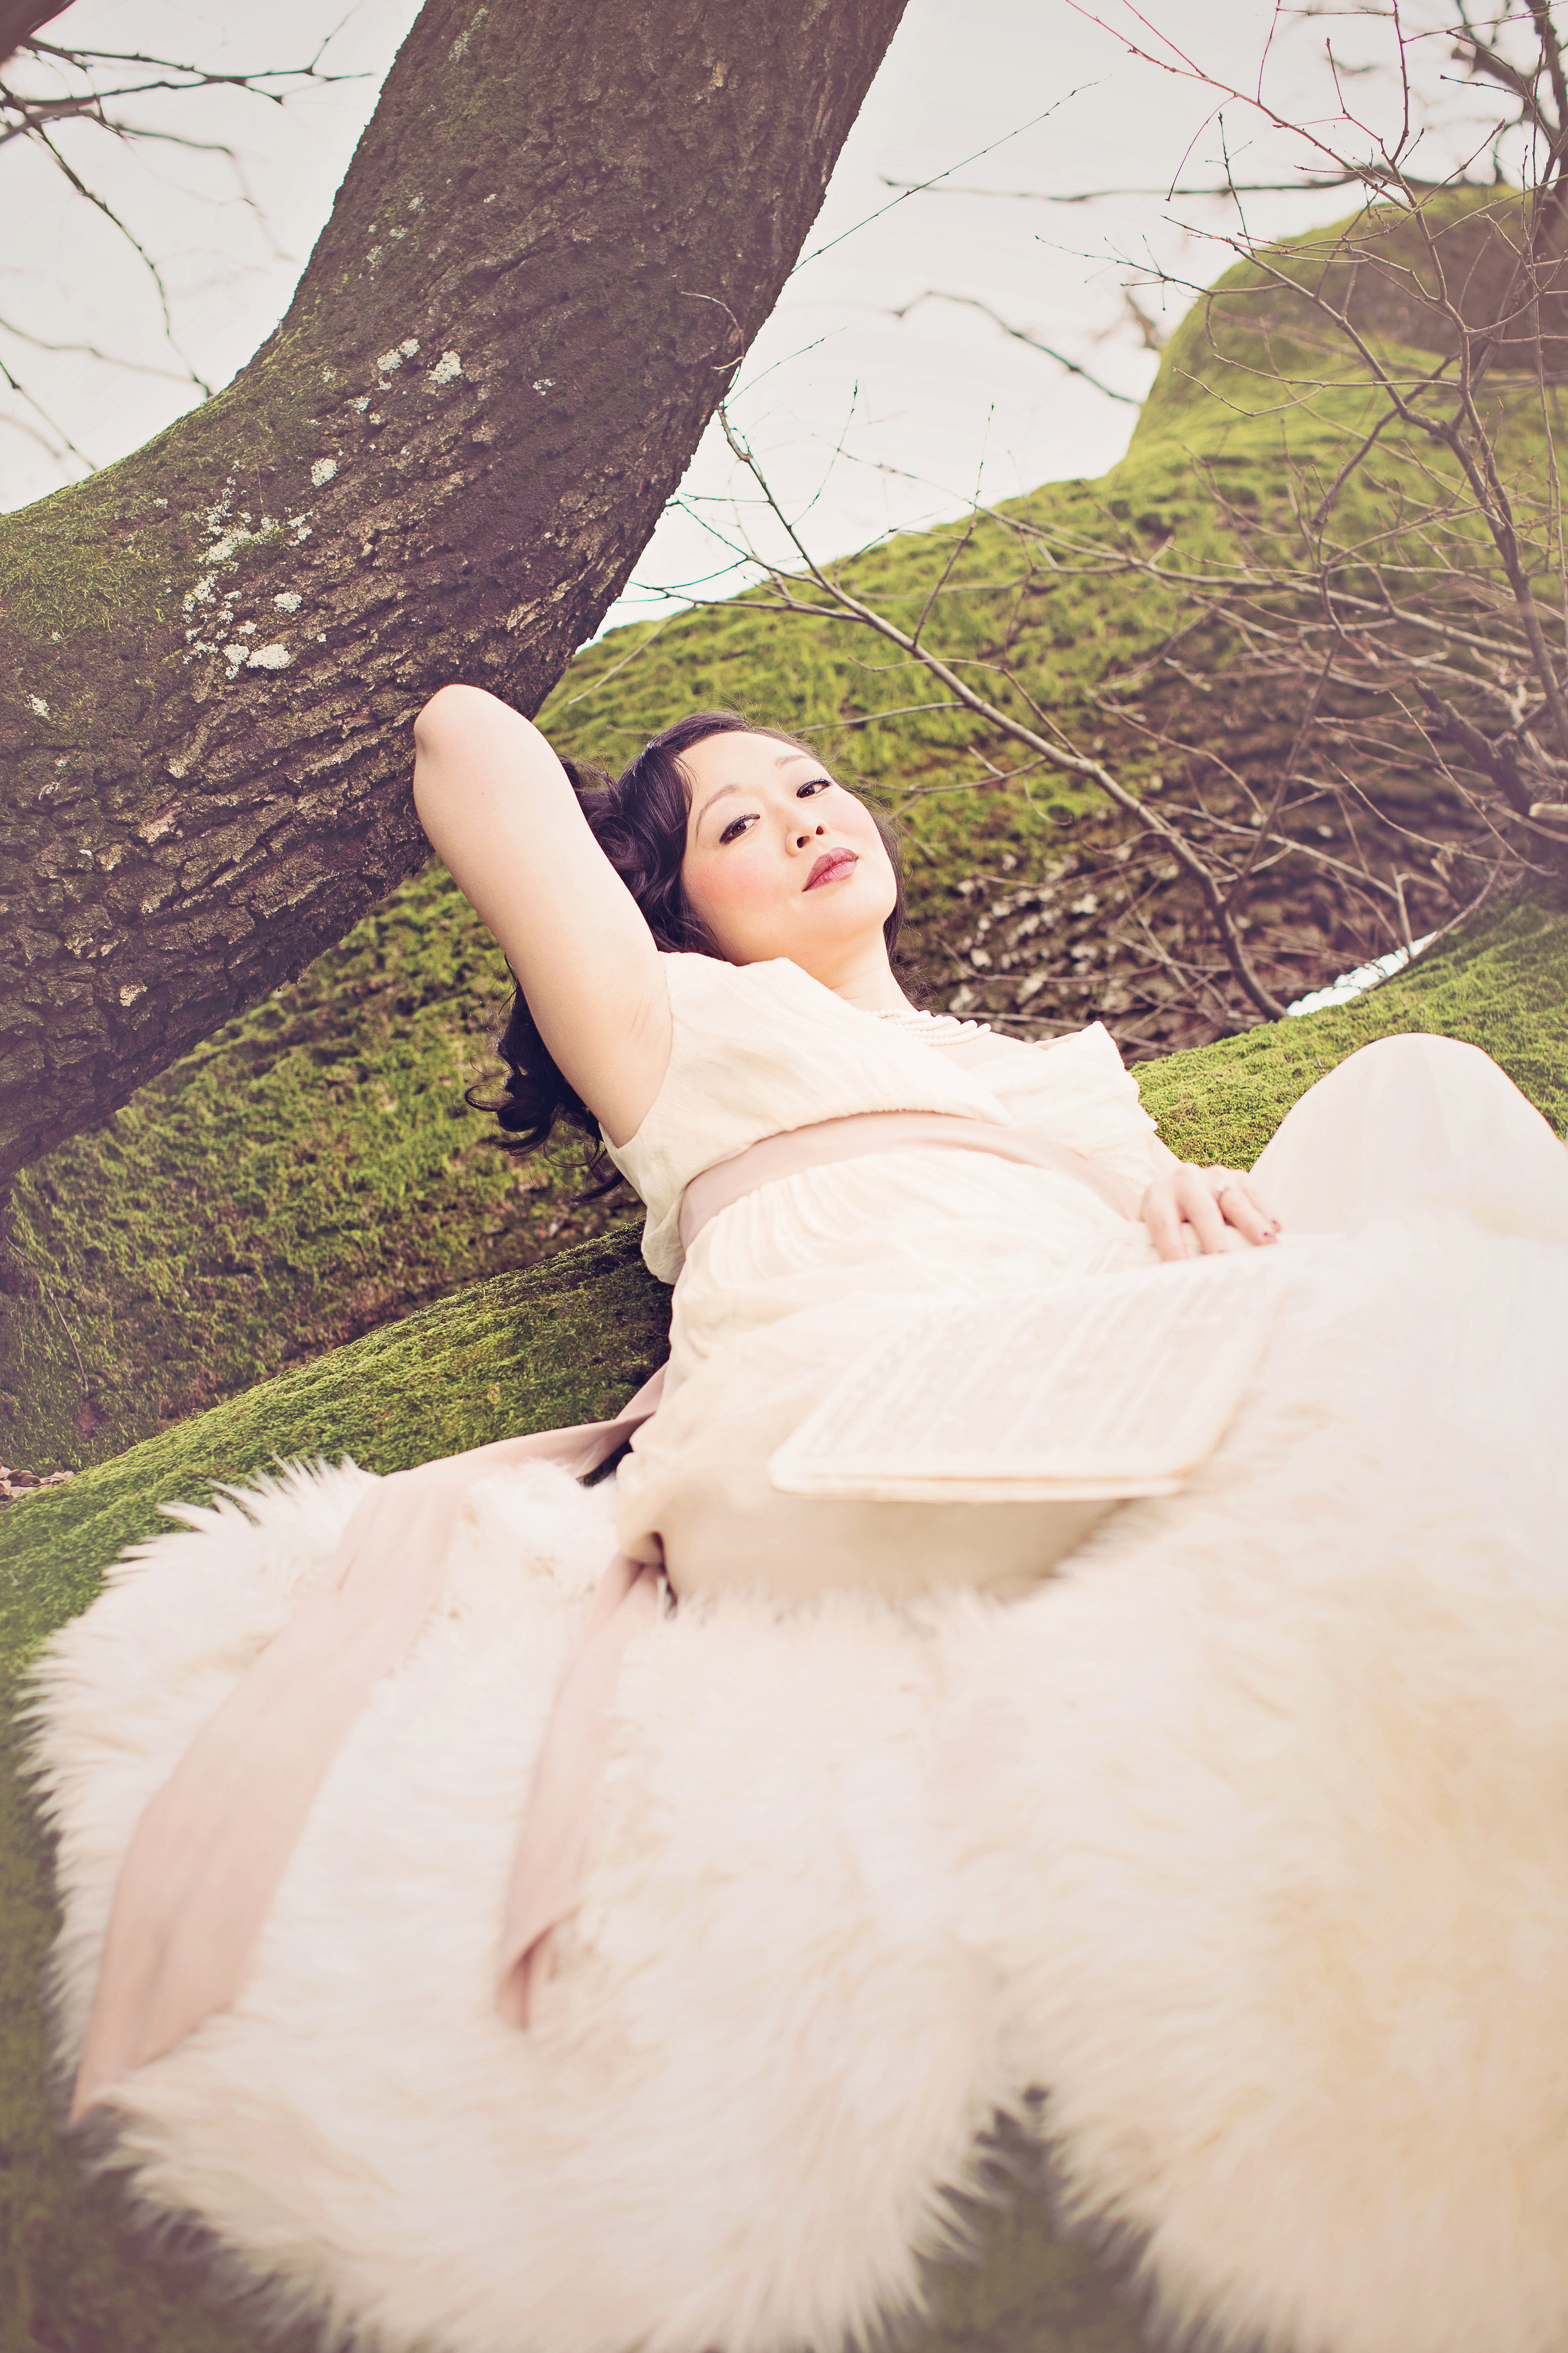 Charlene Chi lying on a 600 year old tree with sheet music